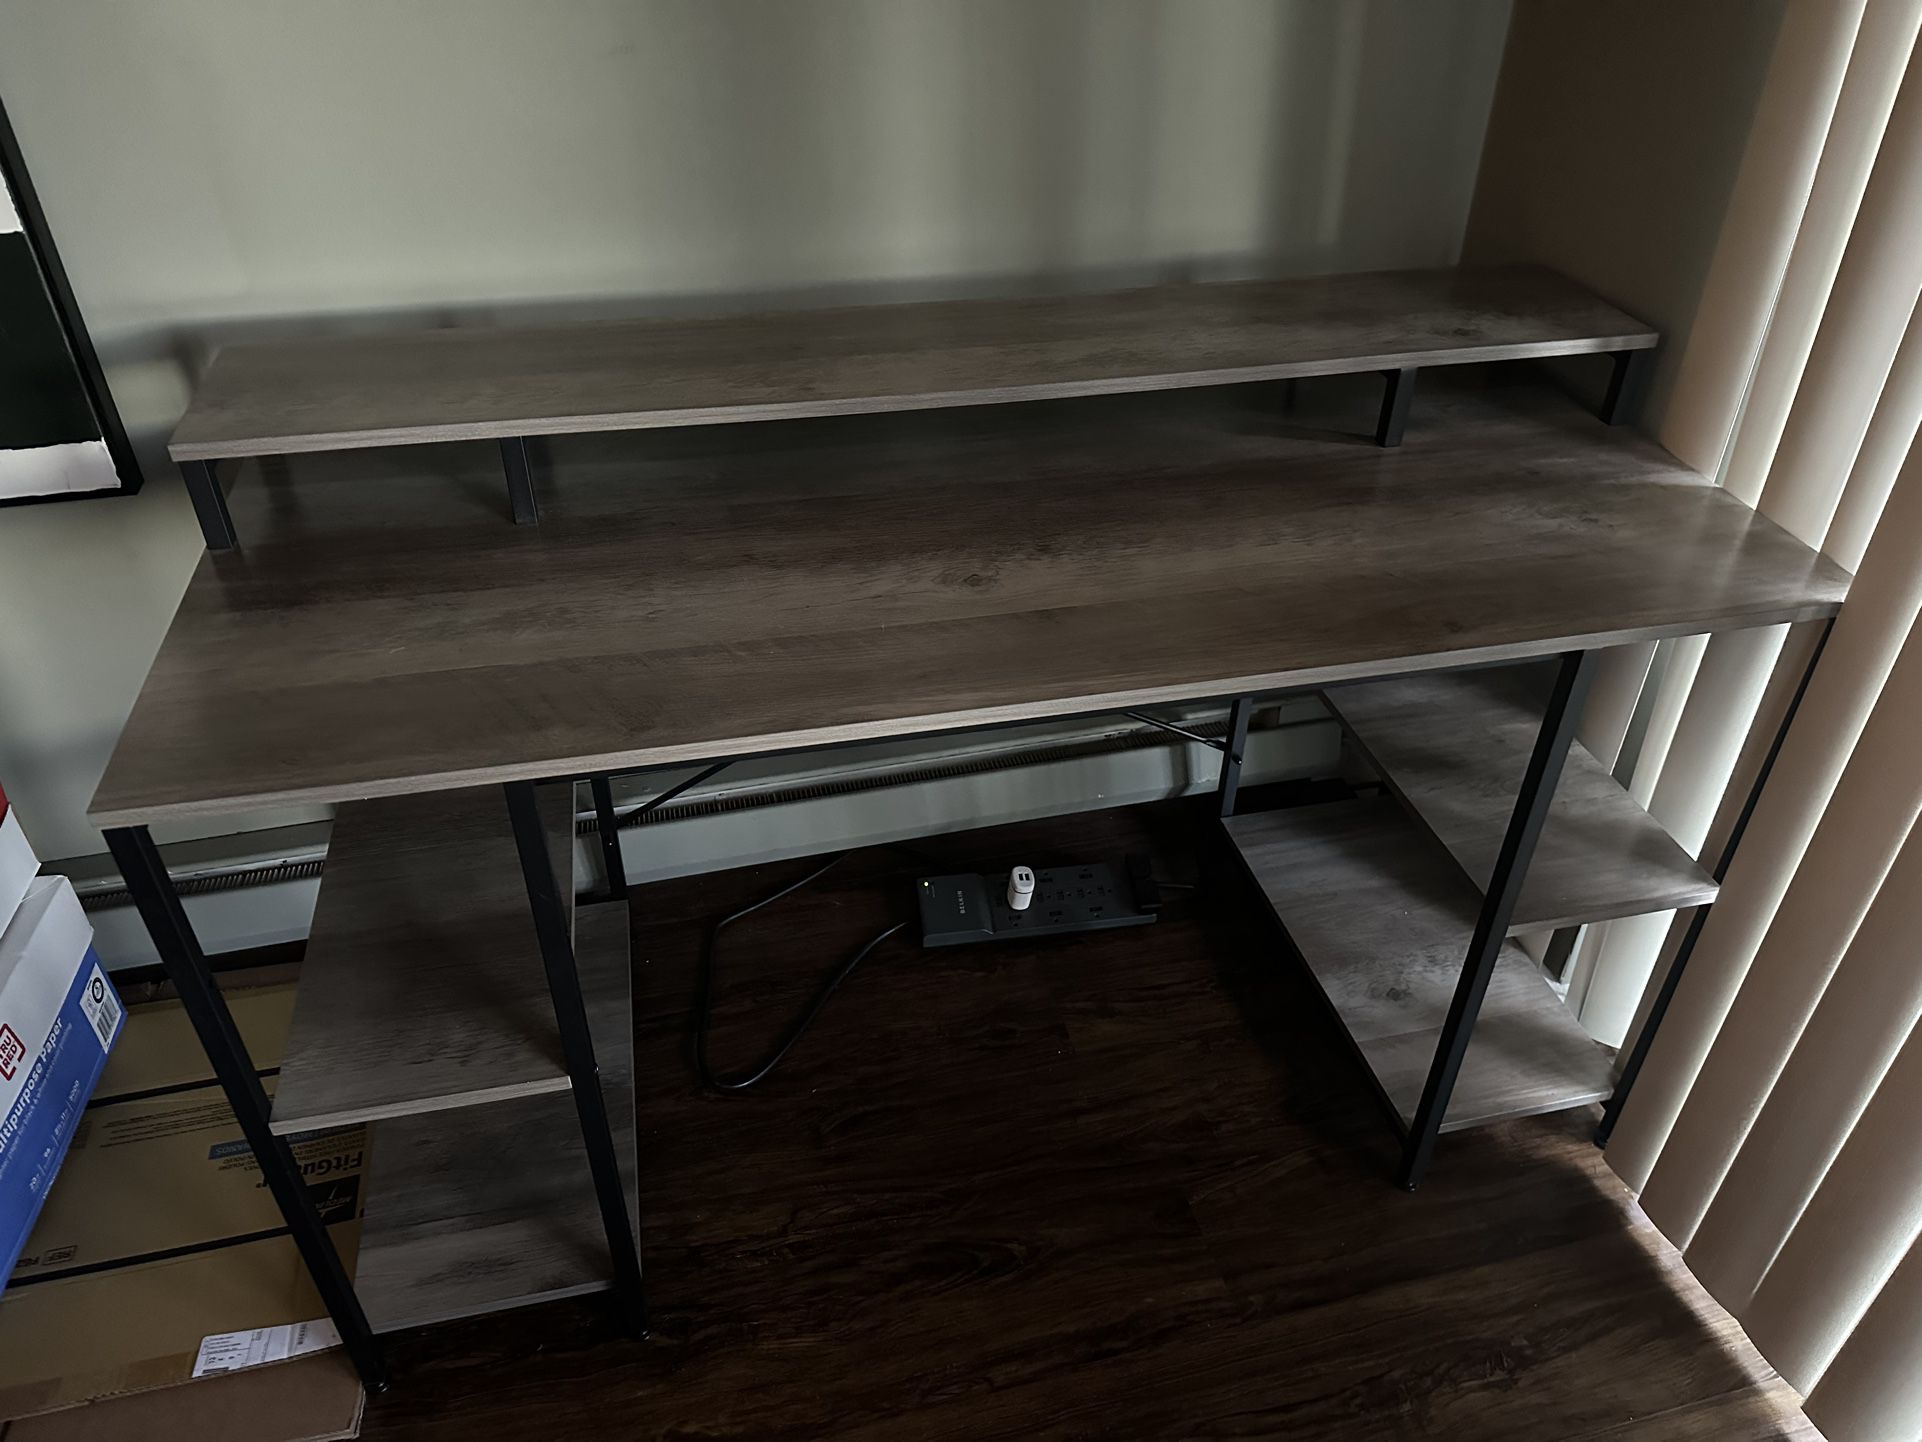 55 Inch Desk - Grey Wood And Desk Chair